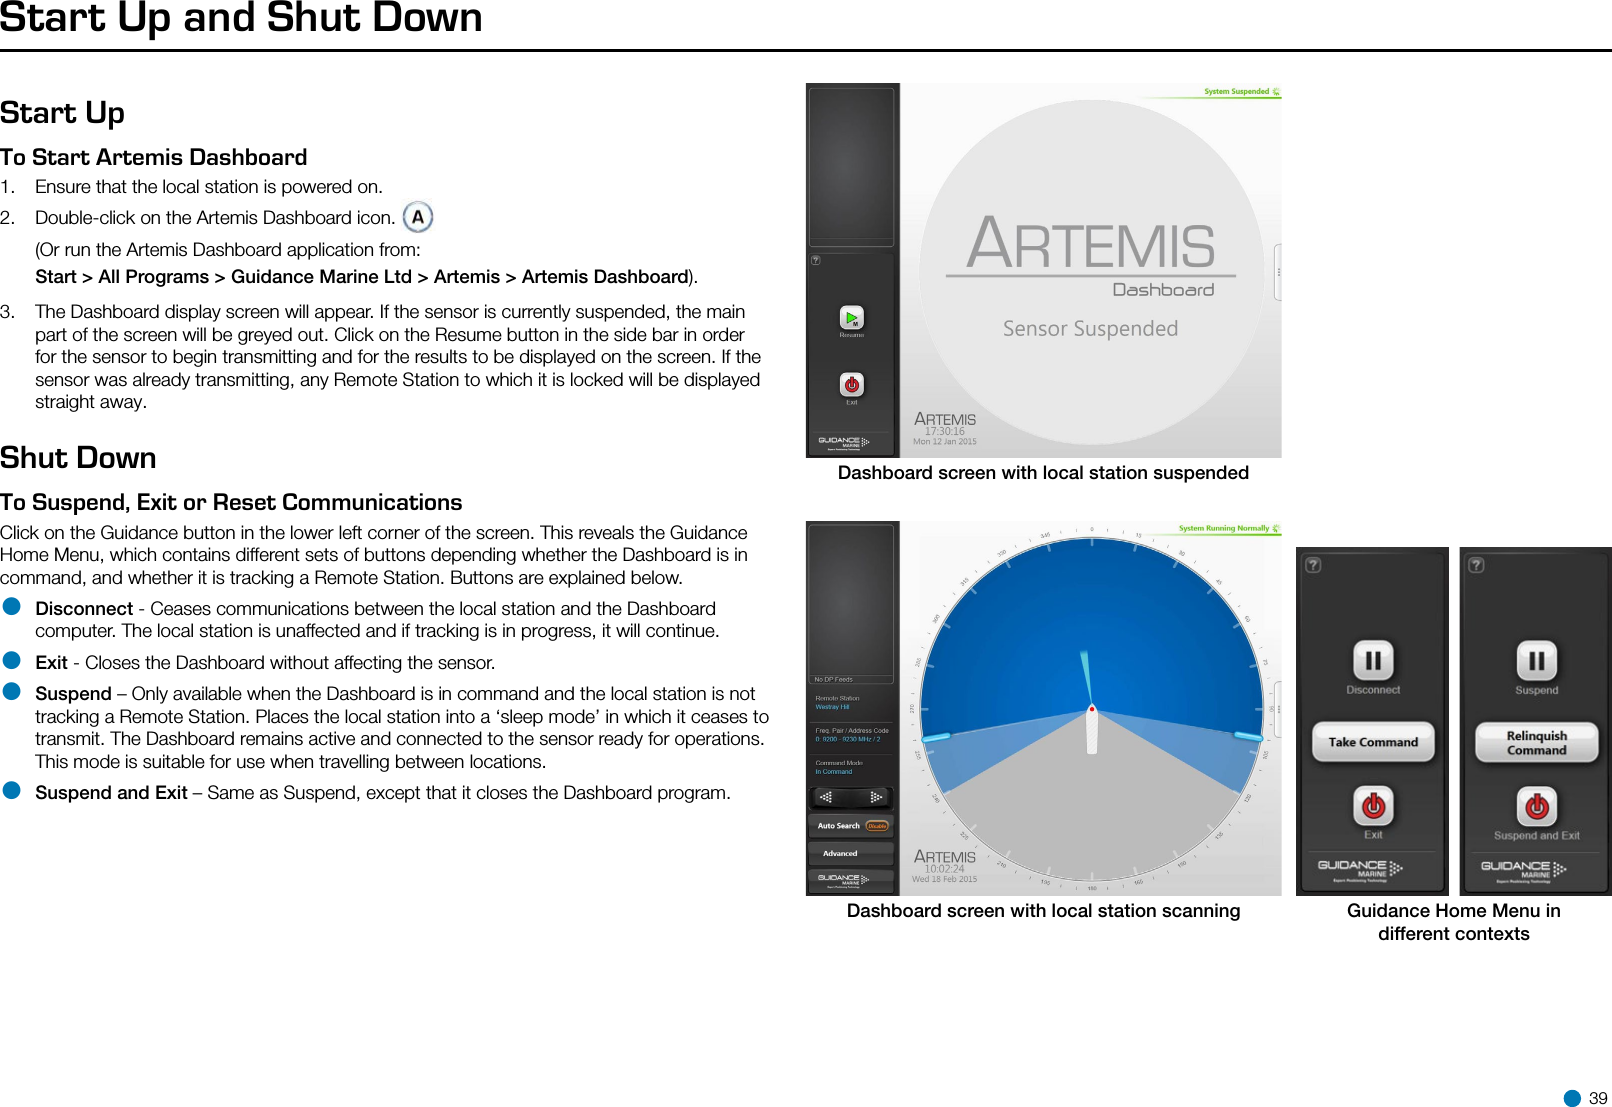 Start Up and Shut DownStart UpTo Start Artemis Dashboard   1.  Ensure that the local station is powered on.2.  Double-click on the Artemis Dashboard icon.  (Or run the Artemis Dashboard application from:  Start &gt; All Programs &gt; Guidance Marine Ltd &gt; Artemis &gt; Artemis Dashboard).3.  The Dashboard display screen will appear. If the sensor is currently suspended, the main part of the screen will be greyed out. Click on the Resume button in the side bar in order for the sensor to begin transmitting and for the results to be displayed on the screen. If the sensor was already transmitting, any Remote Station to which it is locked will be displayed straight away.Shut DownTo Suspend, Exit or Reset Communications   Click on the Guidance button in the lower left corner of the screen. This reveals the Guidance Home Menu, which contains different sets of buttons depending whether the Dashboard is in command, and whether it is tracking a Remote Station. Buttons are explained below.• Disconnect - Ceases communications between the local station and the Dashboard computer. The local station is unaffected and if tracking is in progress, it will continue.• Exit - Closes the Dashboard without affecting the sensor.• Suspend – Only available when the Dashboard is in command and the local station is not tracking a Remote Station. Places the local station into a ‘sleep mode’ in which it ceases to transmit. The Dashboard remains active and connected to the sensor ready for operations. This mode is suitable for use when travelling between locations.• Suspend and Exit – Same as Suspend, except that it closes the Dashboard program.Dashboard screen with local station suspendedDashboard screen with local station scanning Guidance Home Menu indifferent contexts 39